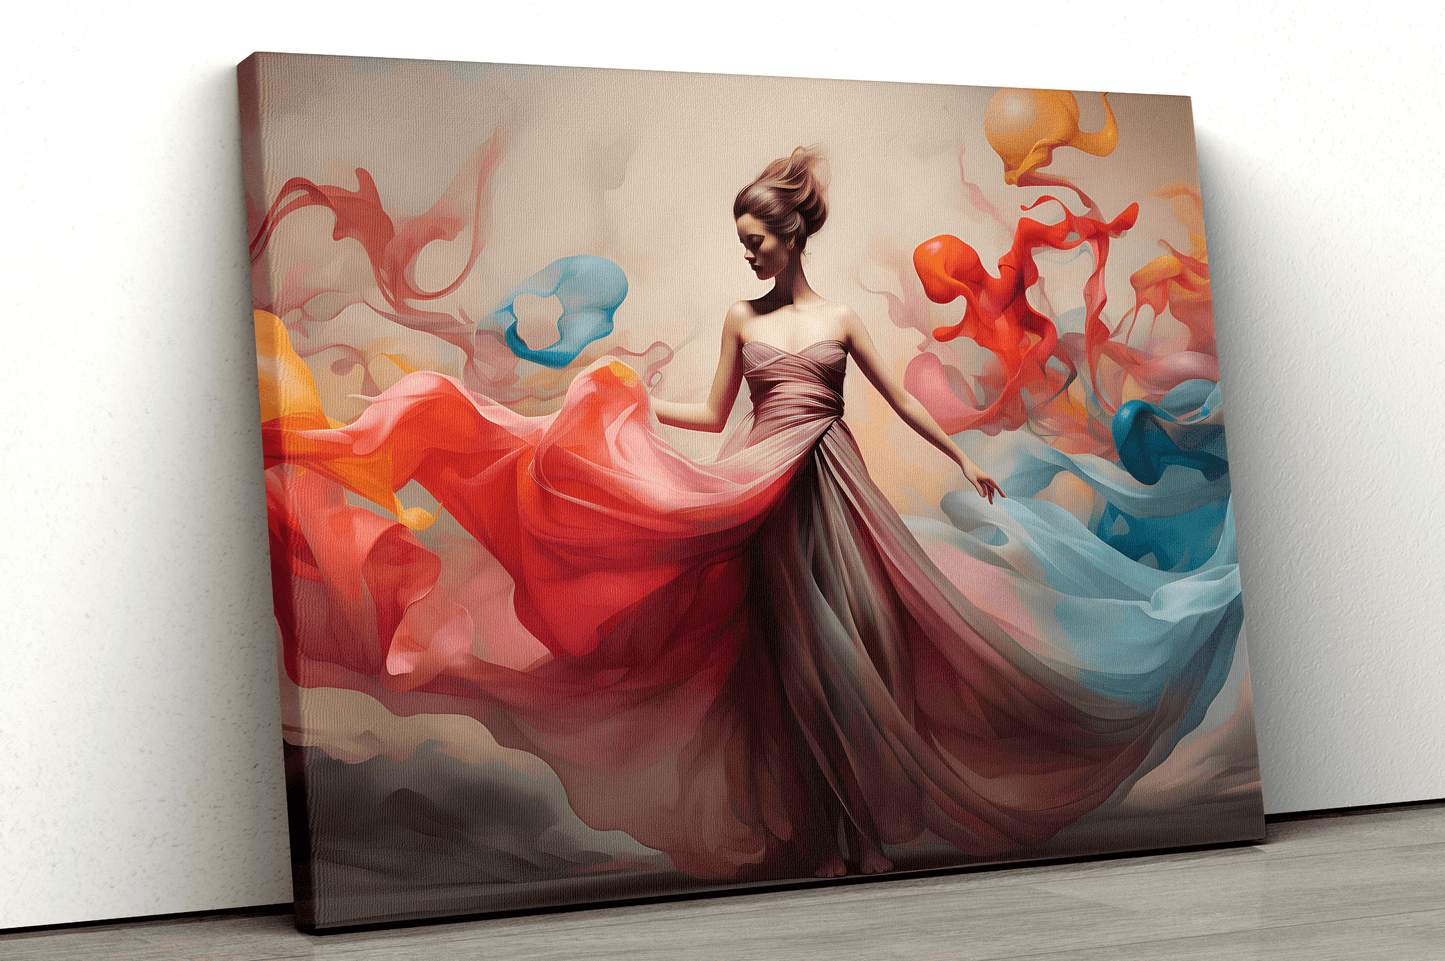 A graceful woman in a flowing, multicolored dress stands against a soft, dreamy background. The dress’s fabric swirls around her, creating vibrant waves in red, orange, blue, and purple. Her elegant pose and serene expression convey a sense of ethereal beauty.